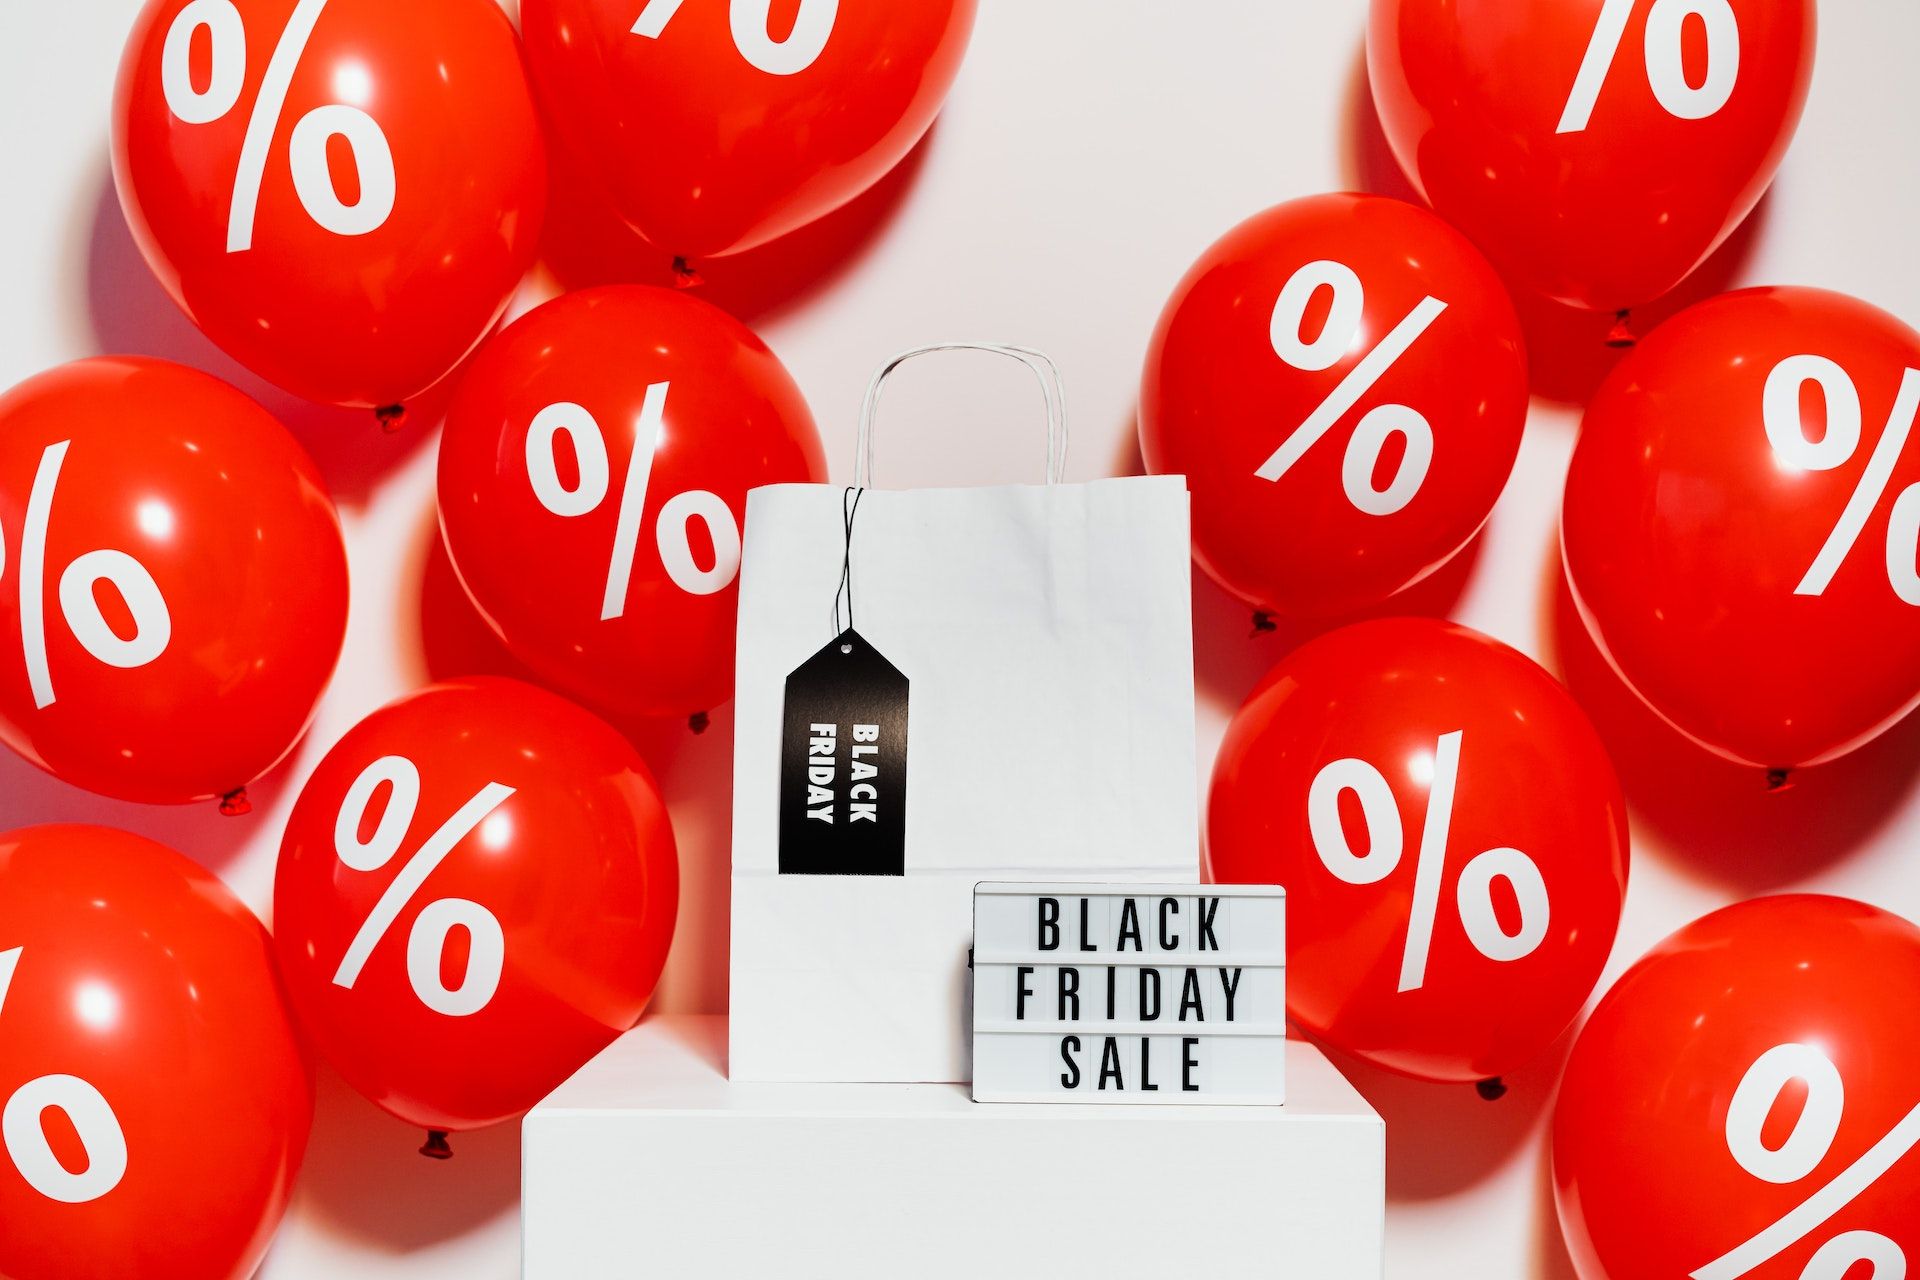 Just your yearly dose of Black Friday spam: Cybercrooks get ahead